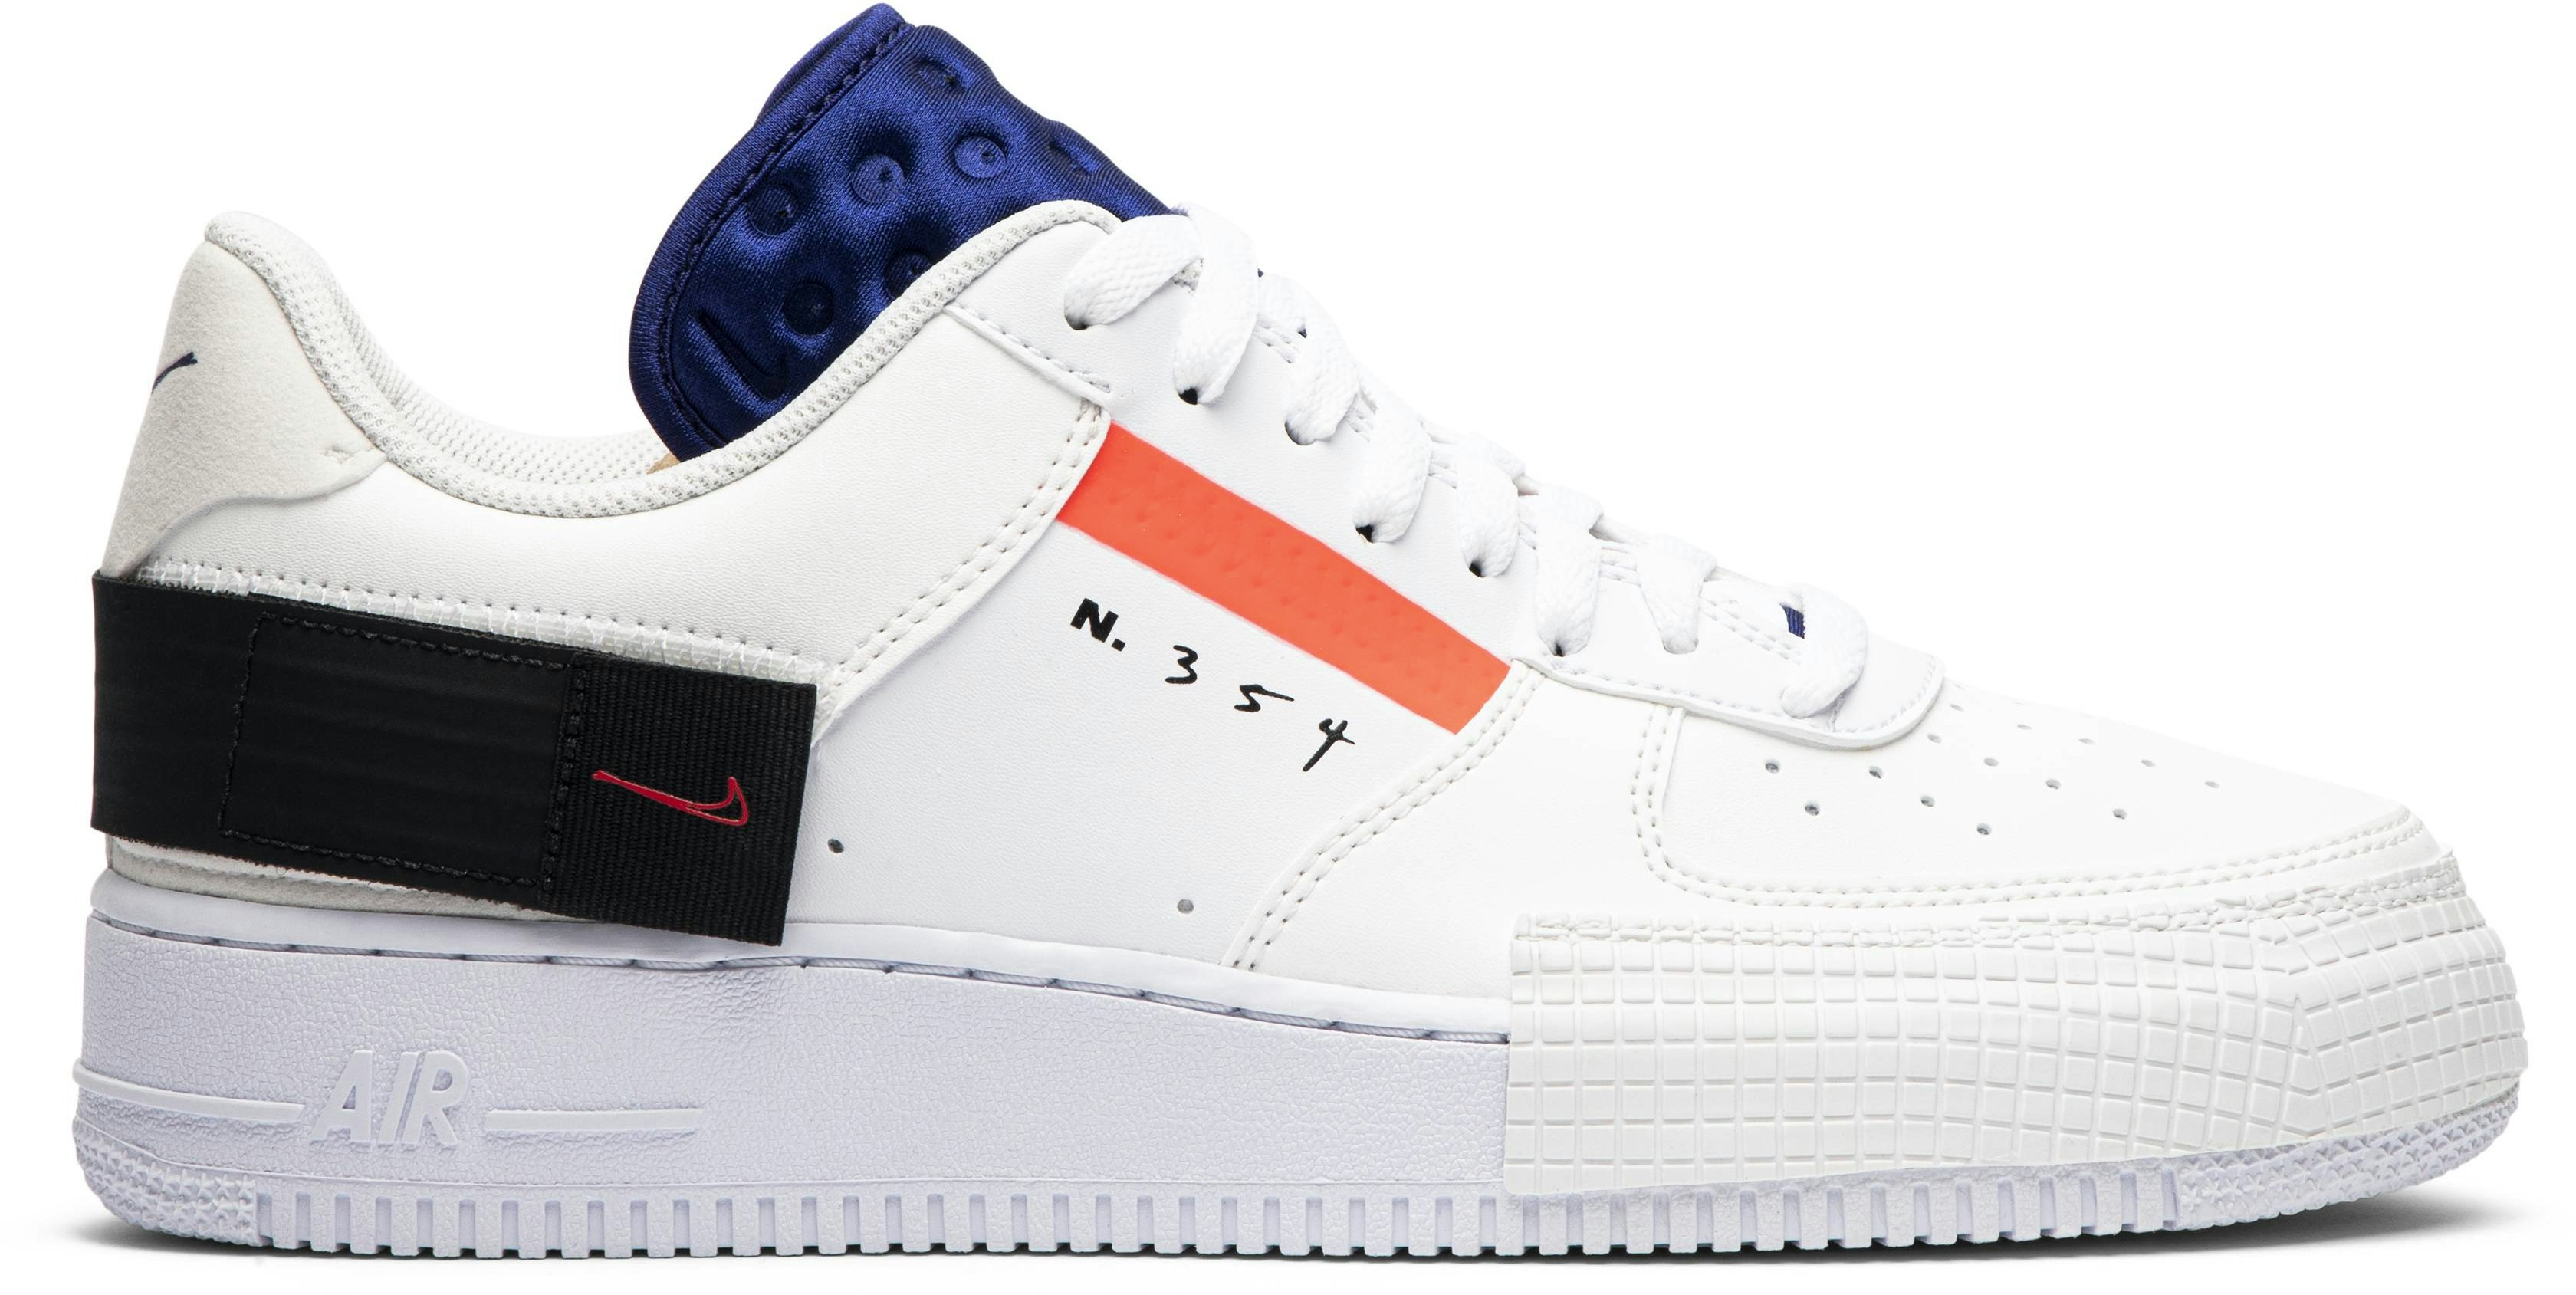 Nombre provisional Turismo encima Nike Air Force 1 Low Drop Type 'Summit White' - CI0054-100 - Novelship